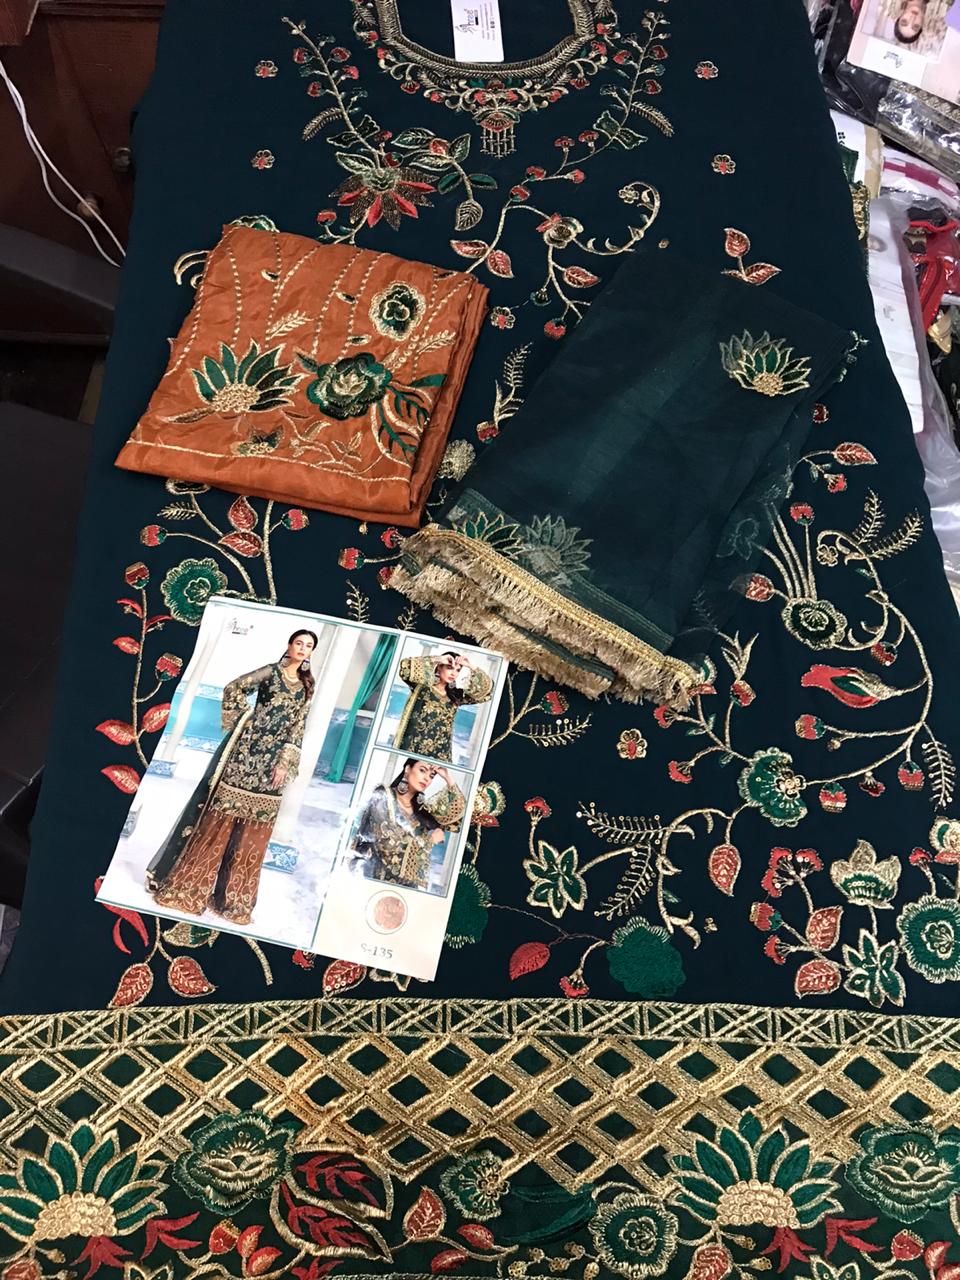 SHREE FABS S 134 GREEN PAKISTANI SUITS IN SINGLE PIECE